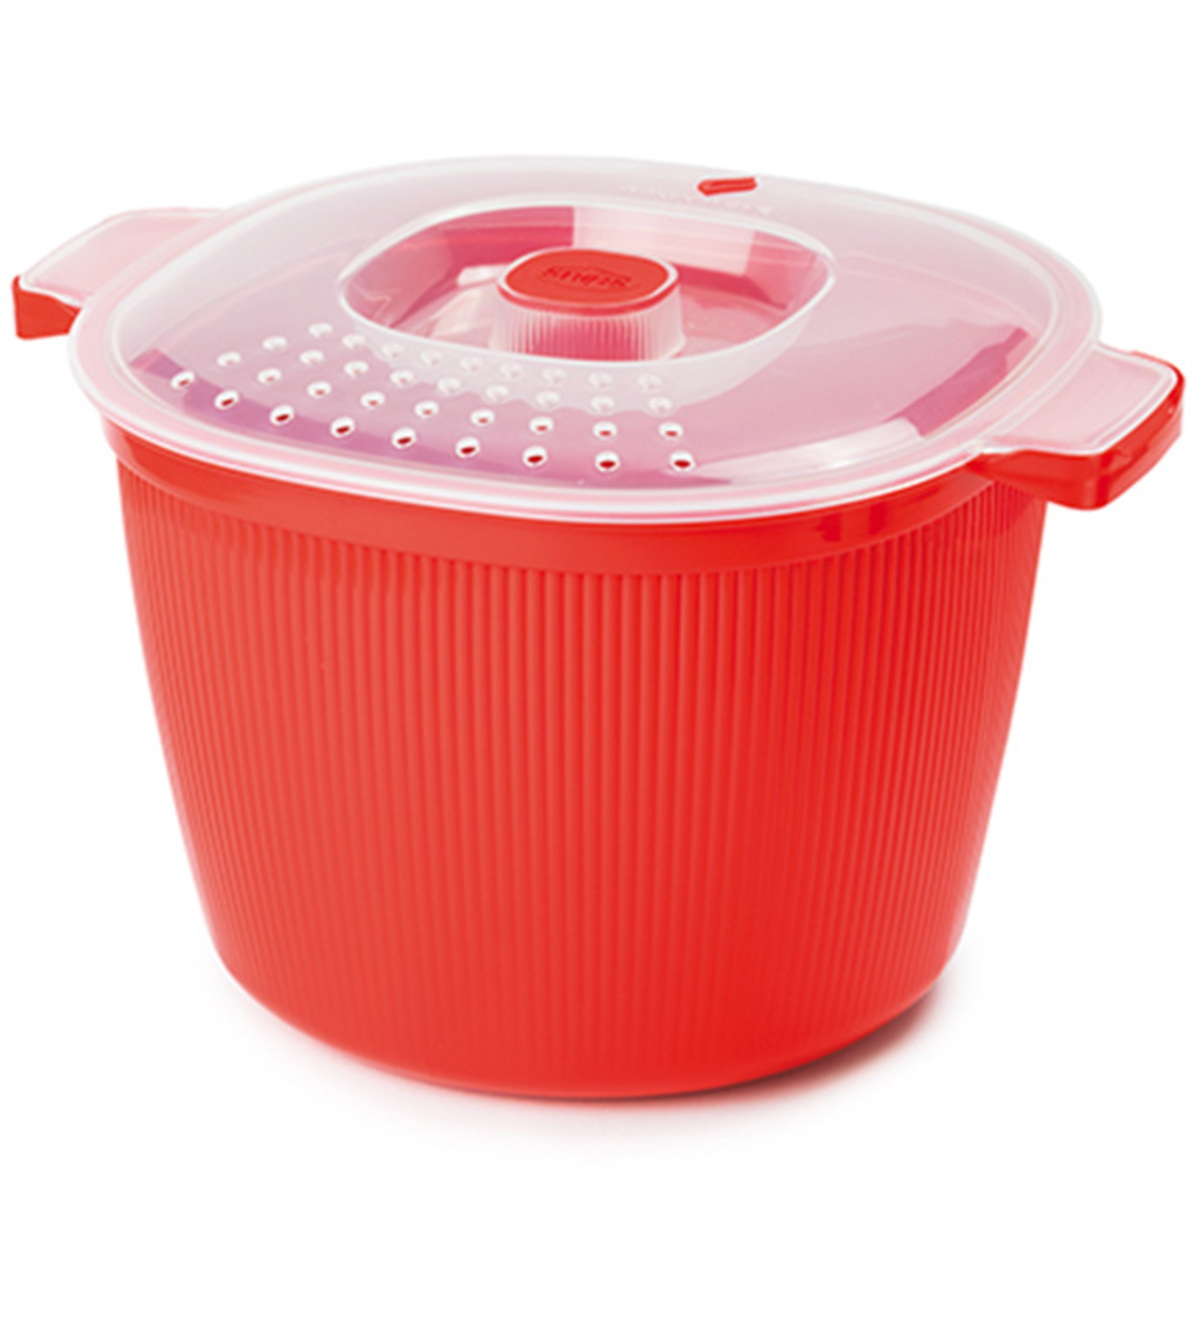 SNIPS PASTA COOKER 4LTR SUITABLE FOR MICROWAVE 